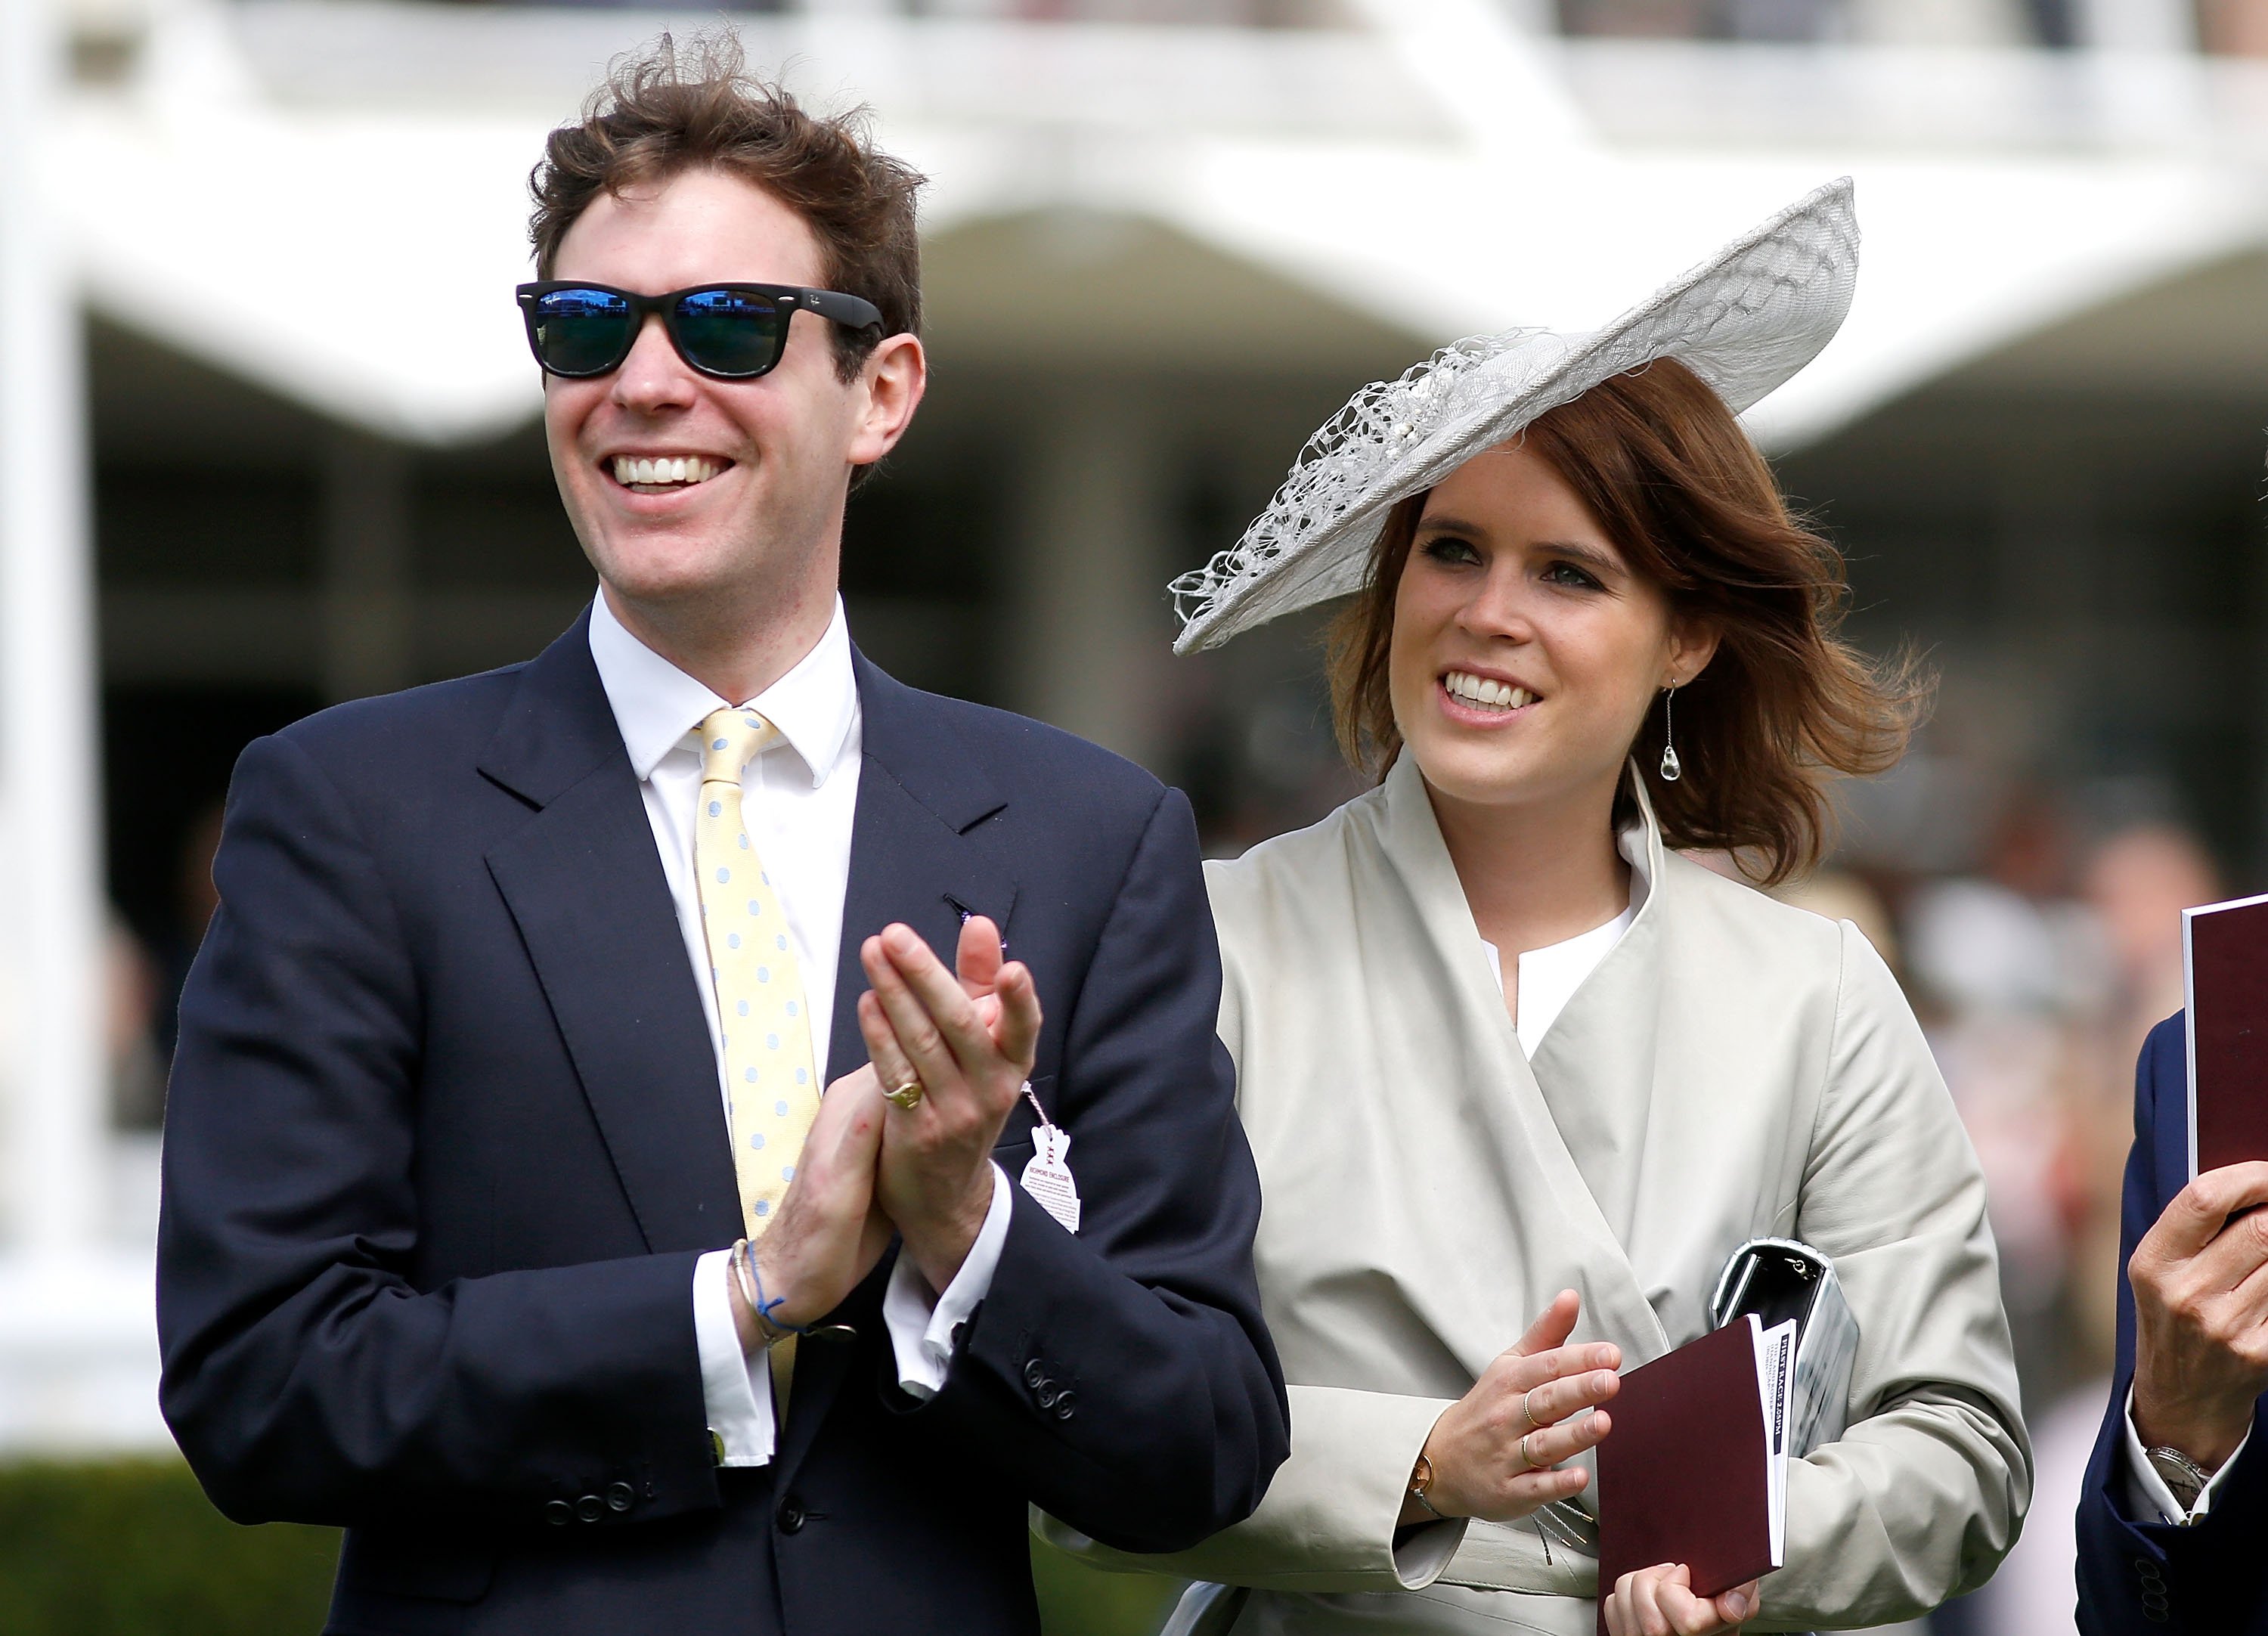 Princess Eugenie pictured attending at the Qatar Goodwood Festival at Goodwood Racecourse, 2015, England. | Photo: Getty Images